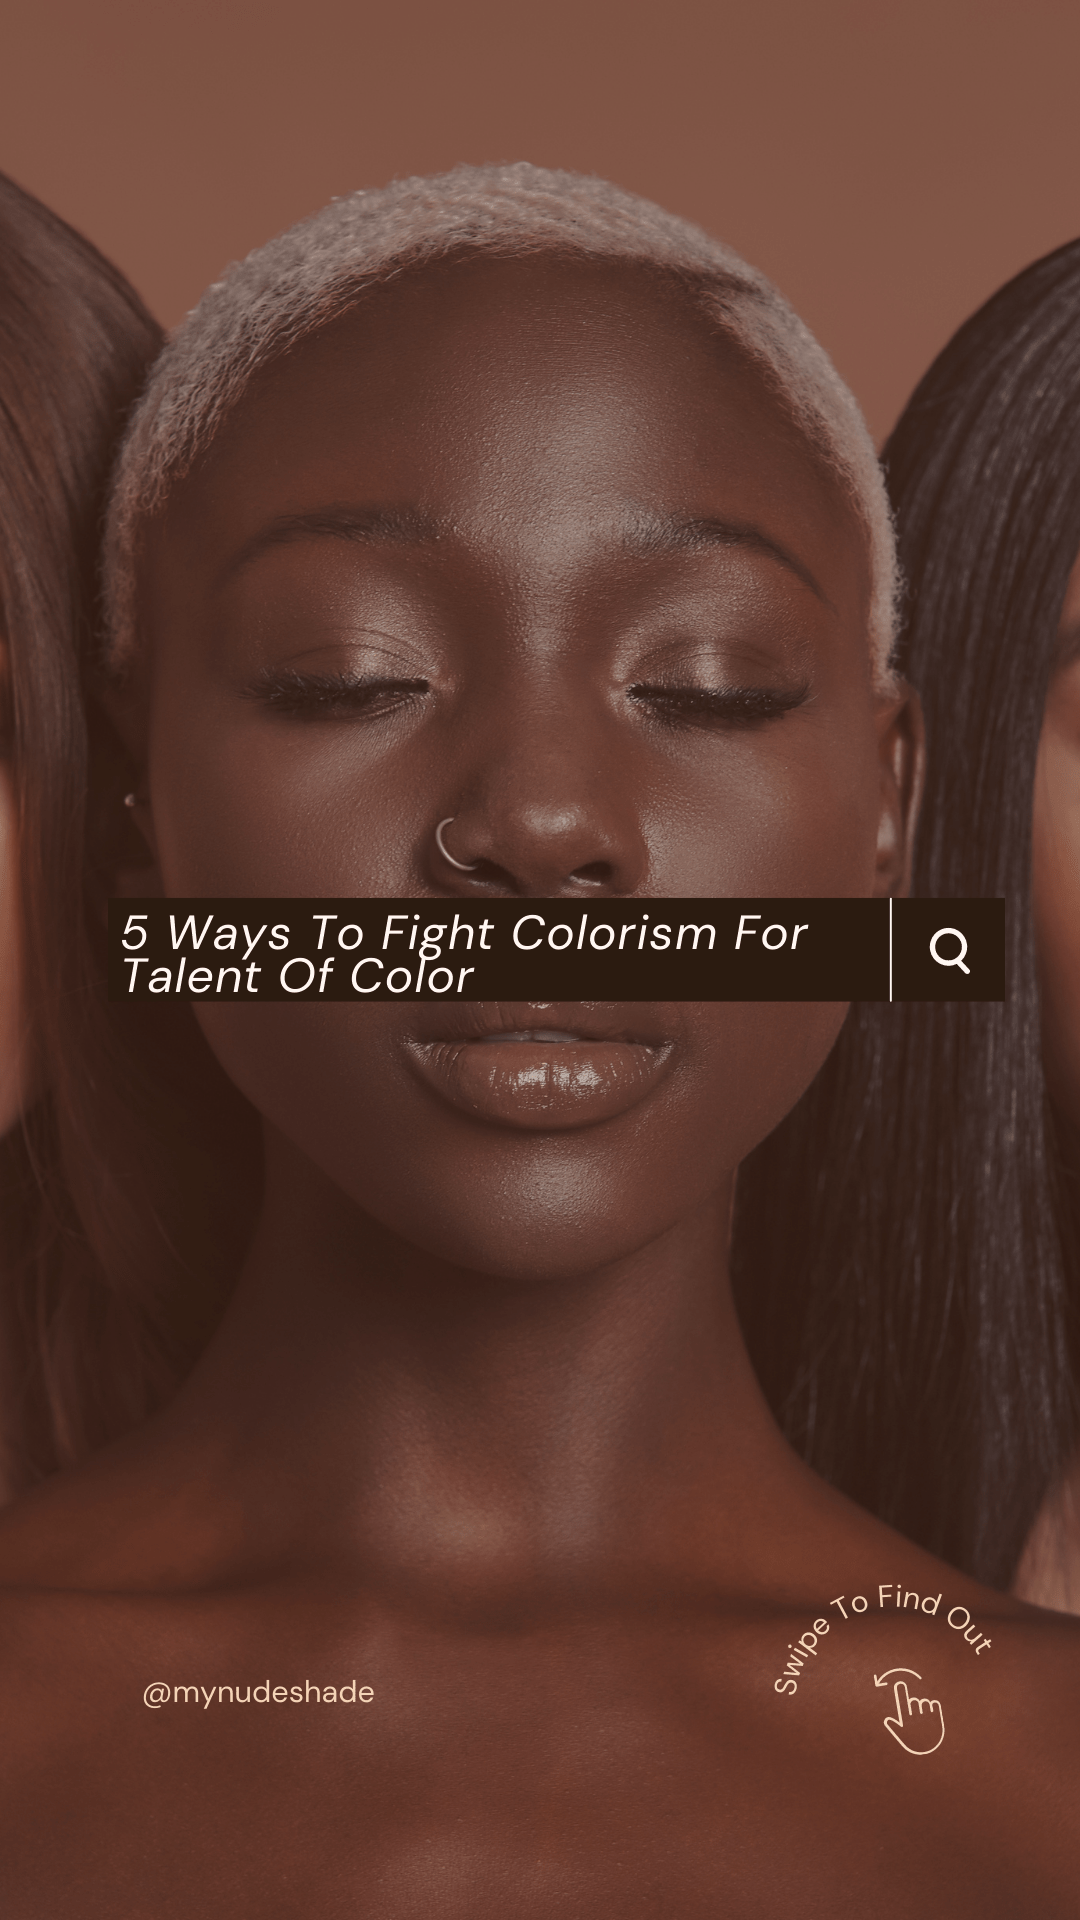 A photo of a dark skin model with a text box over her face about colorism.